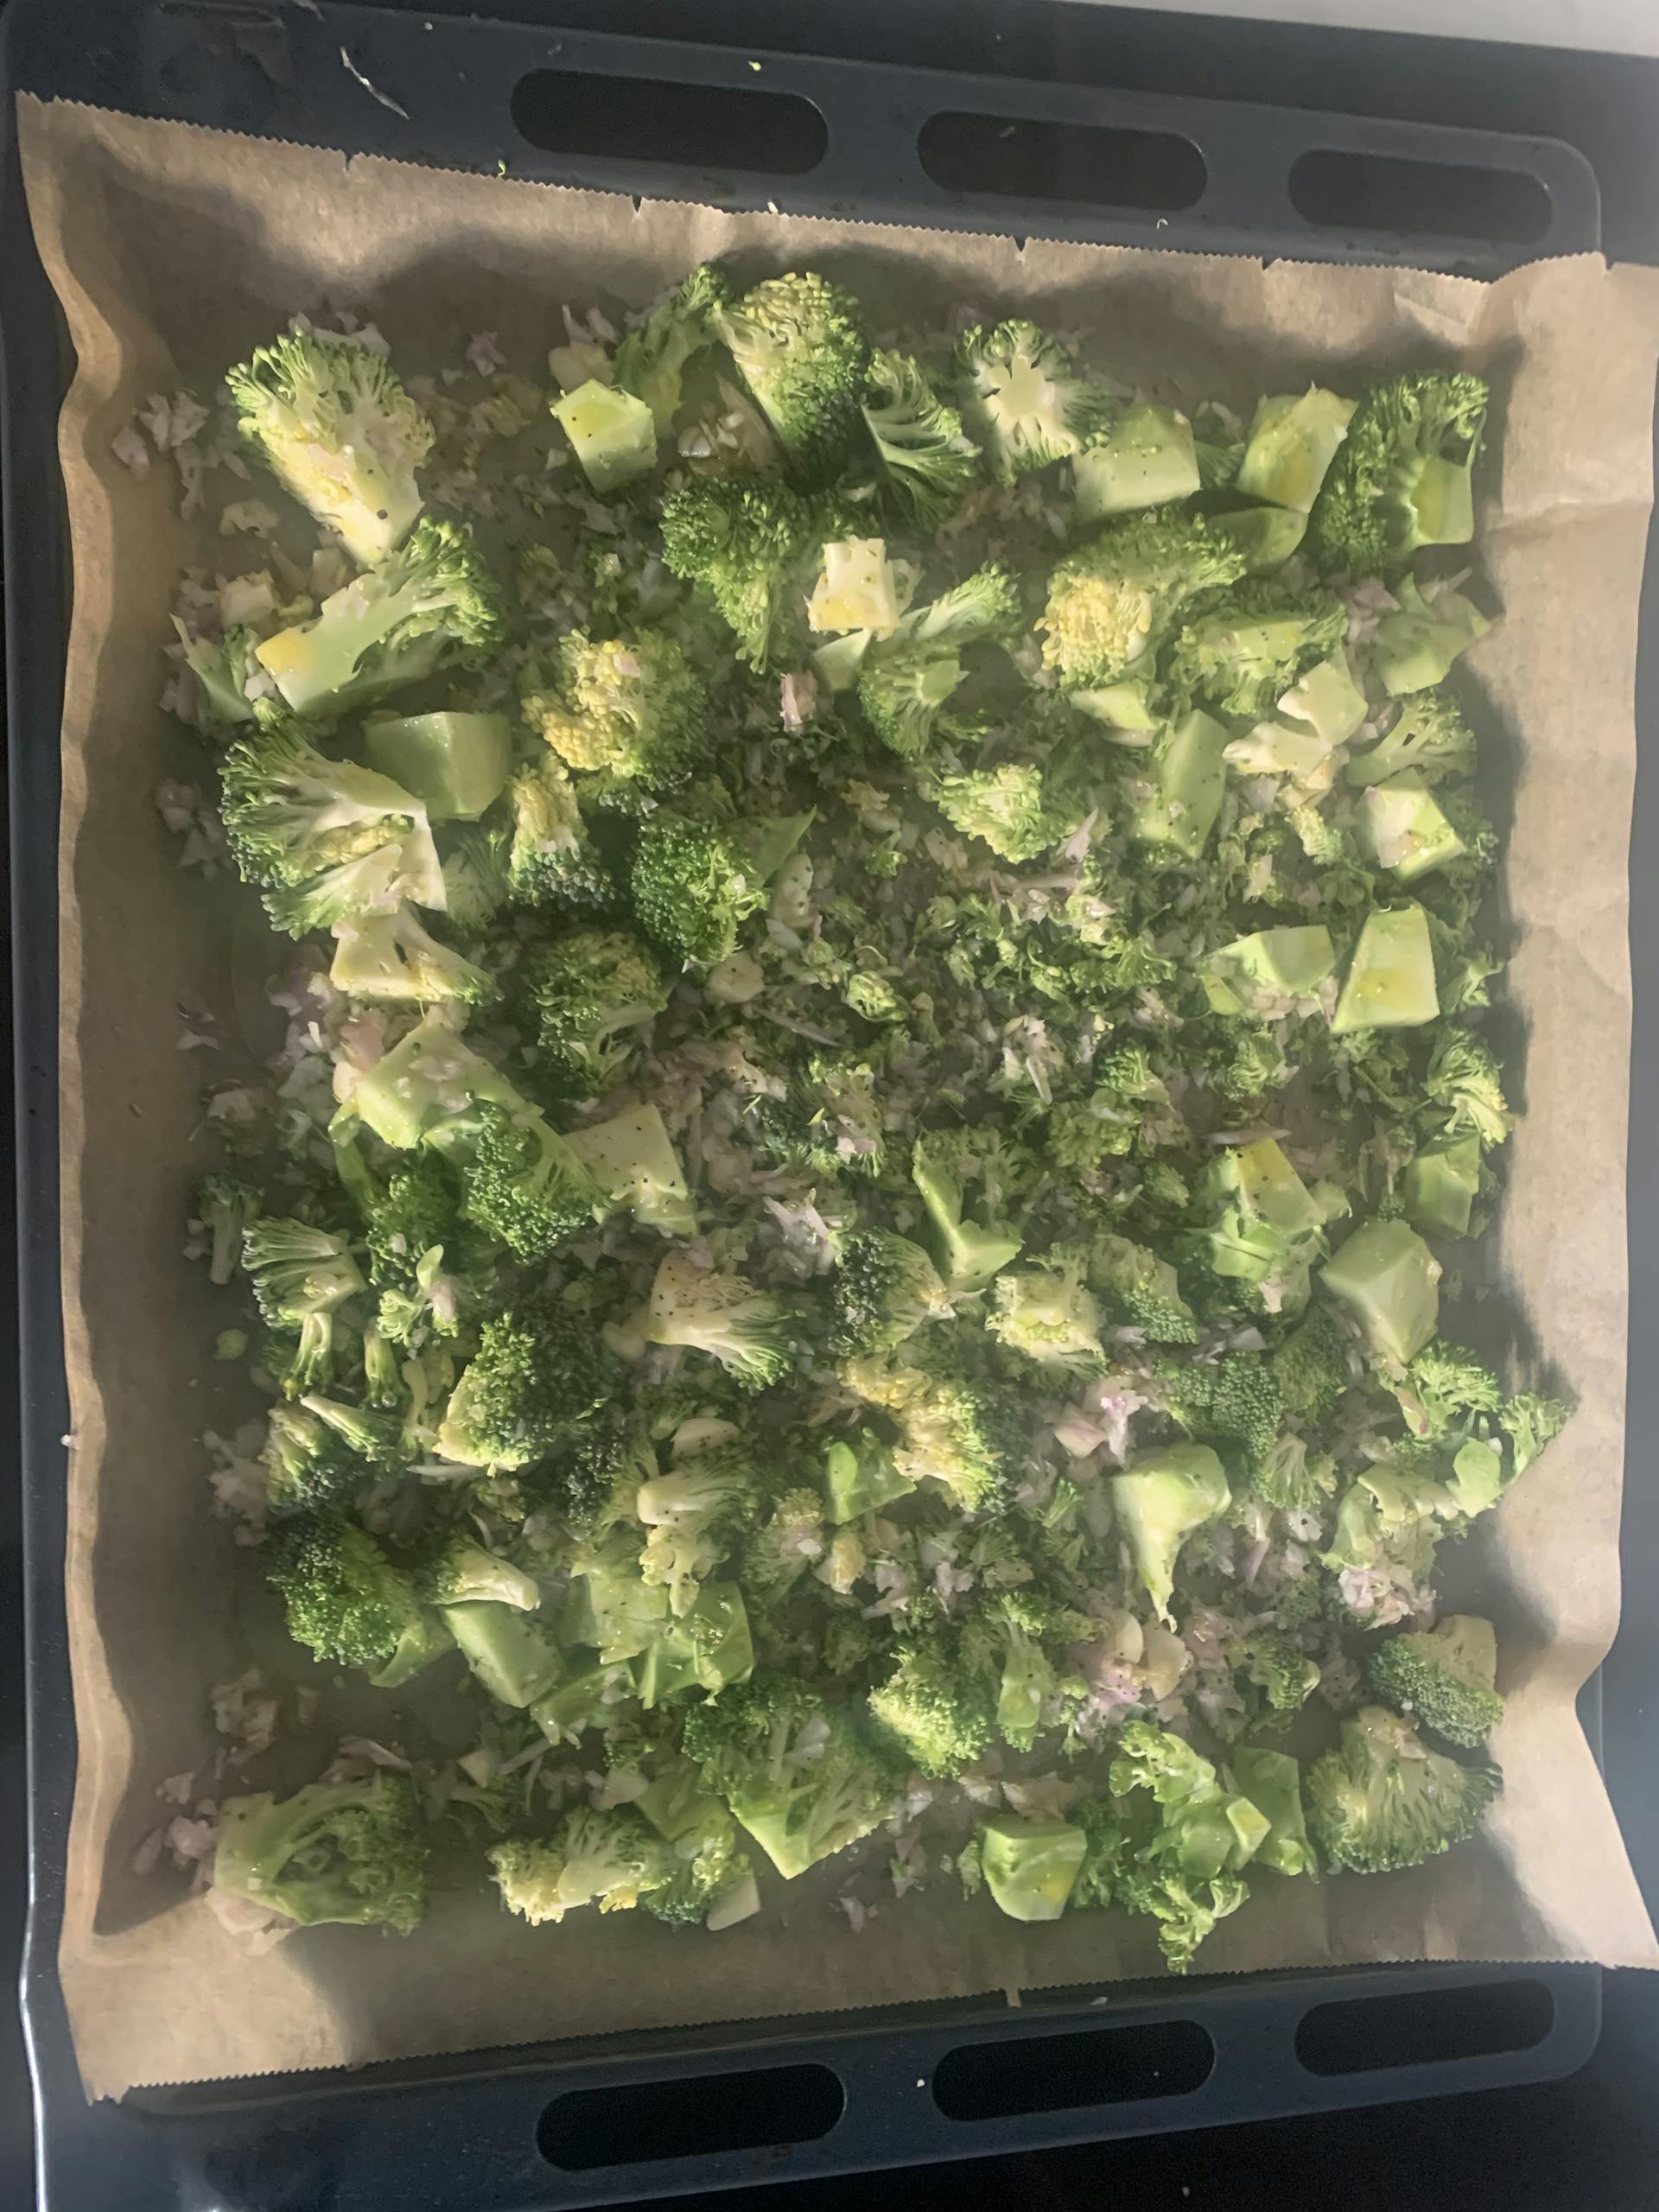 Image of step 4 called: Broccoli in de oven 